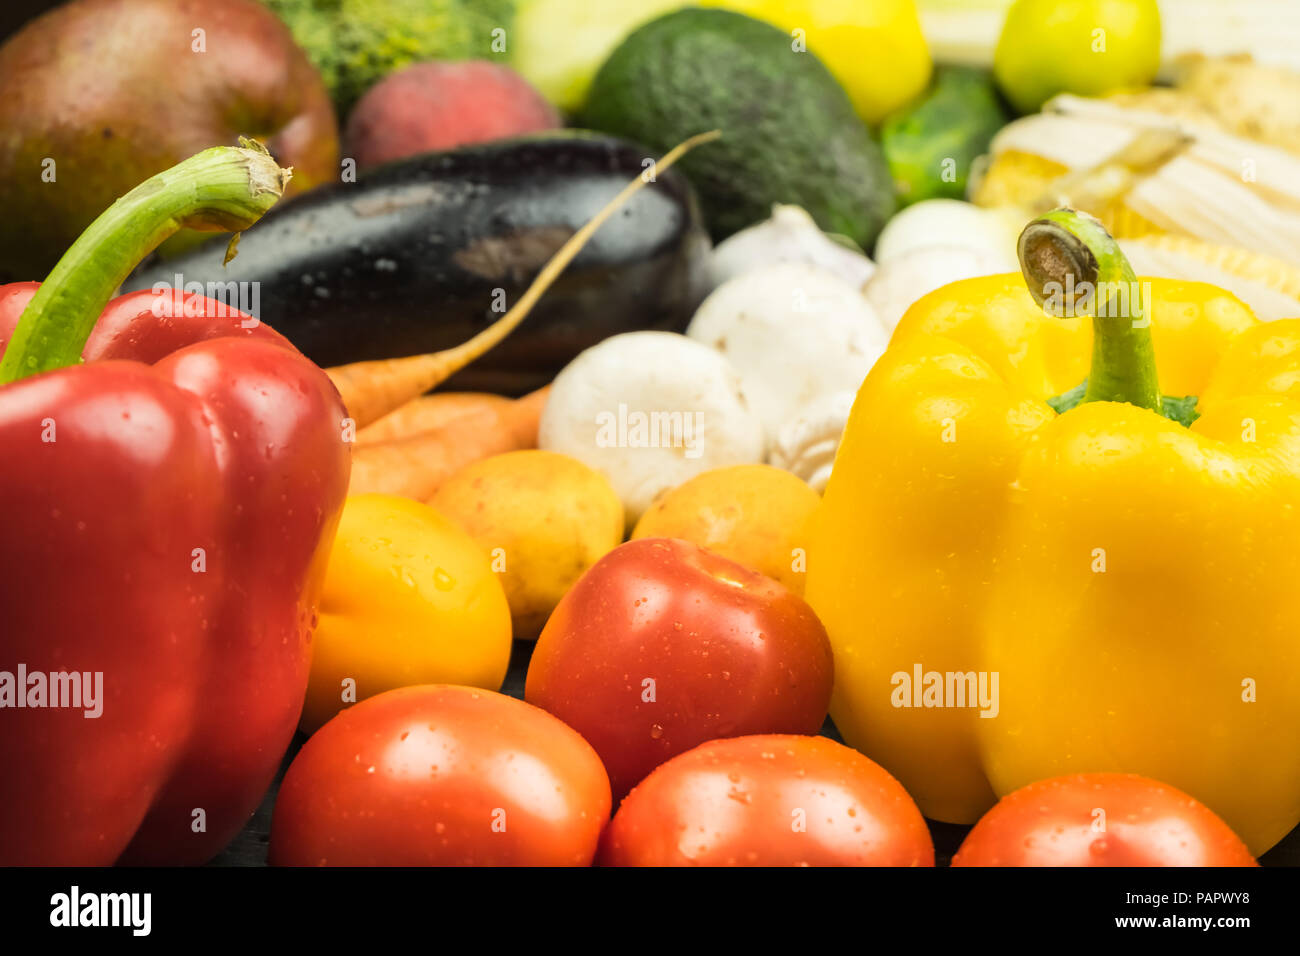 Close-up view of fresh organic bell peppers, tomatoes and other vegetables. Locally grown natural vegan food laying on table. Stock Photo